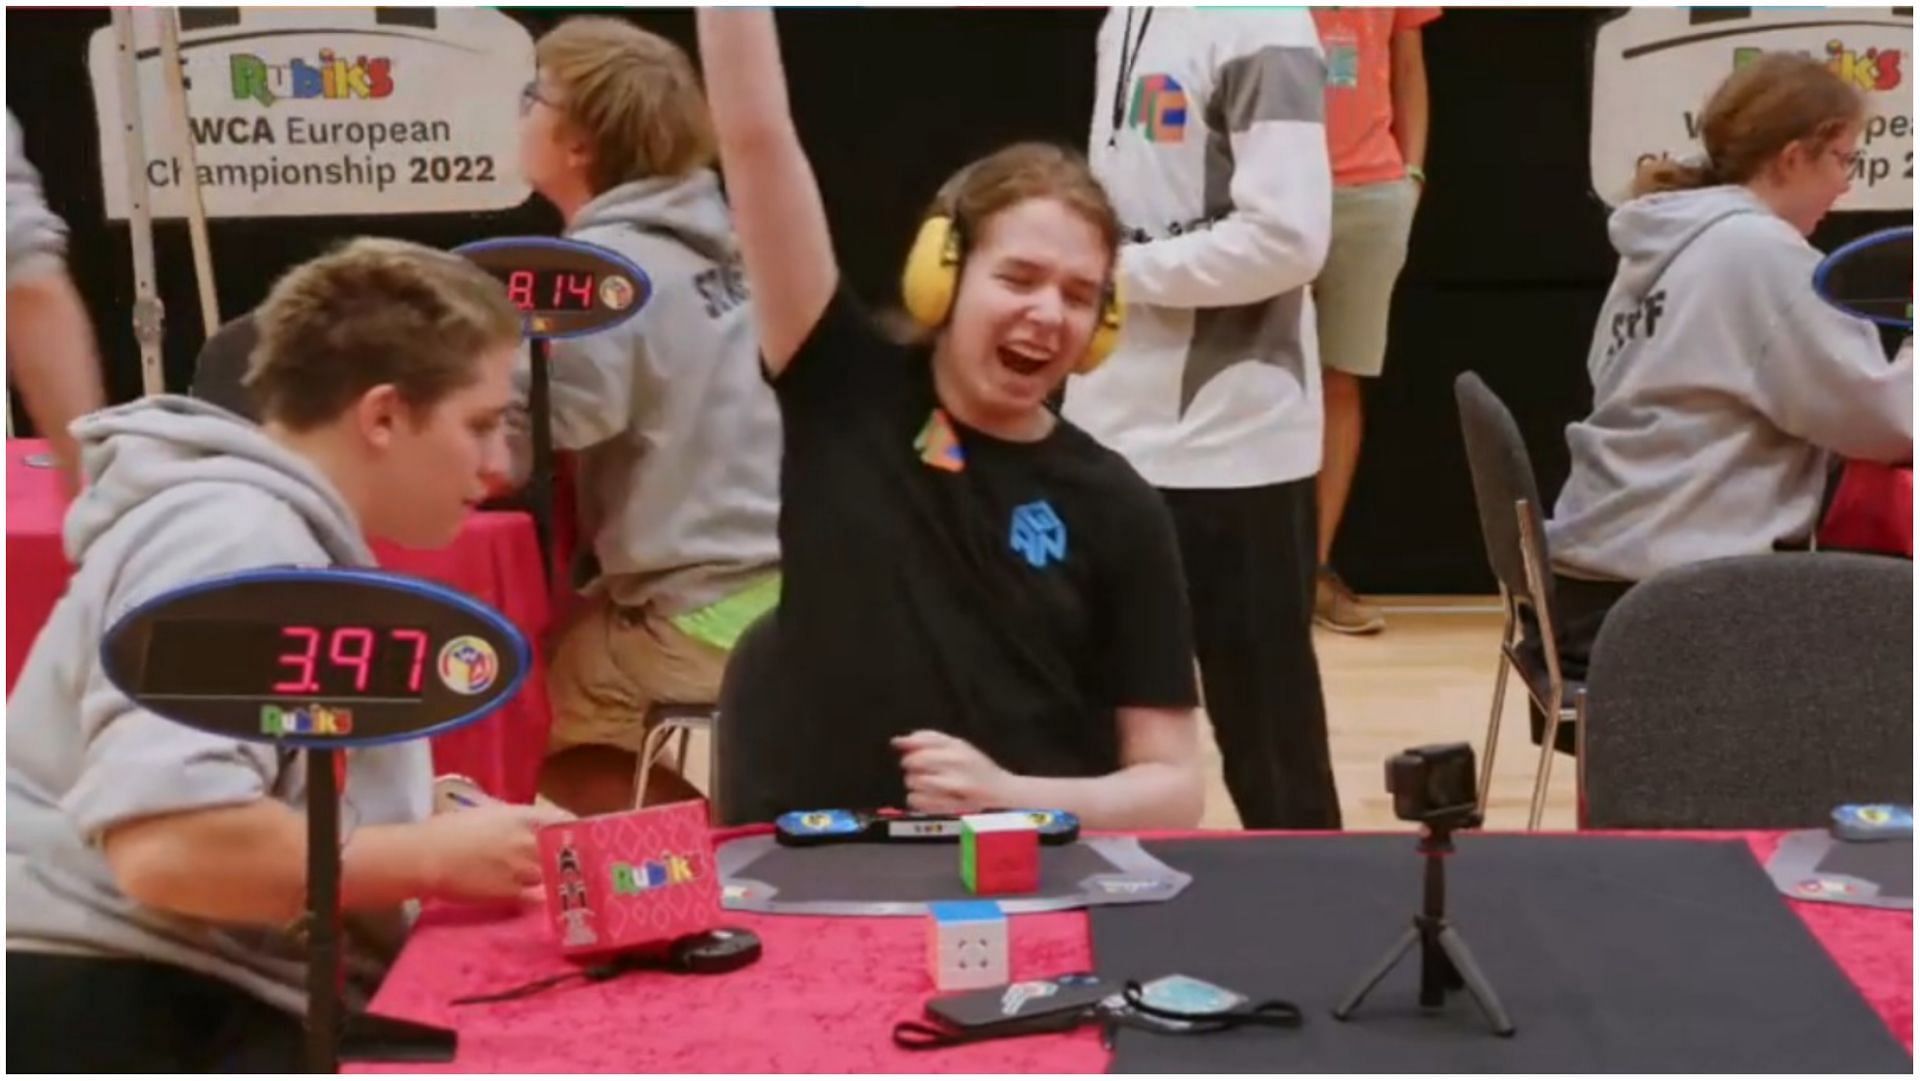 Teenager solves Rubik's Cube in 3.97 seconds, breaks record on camera